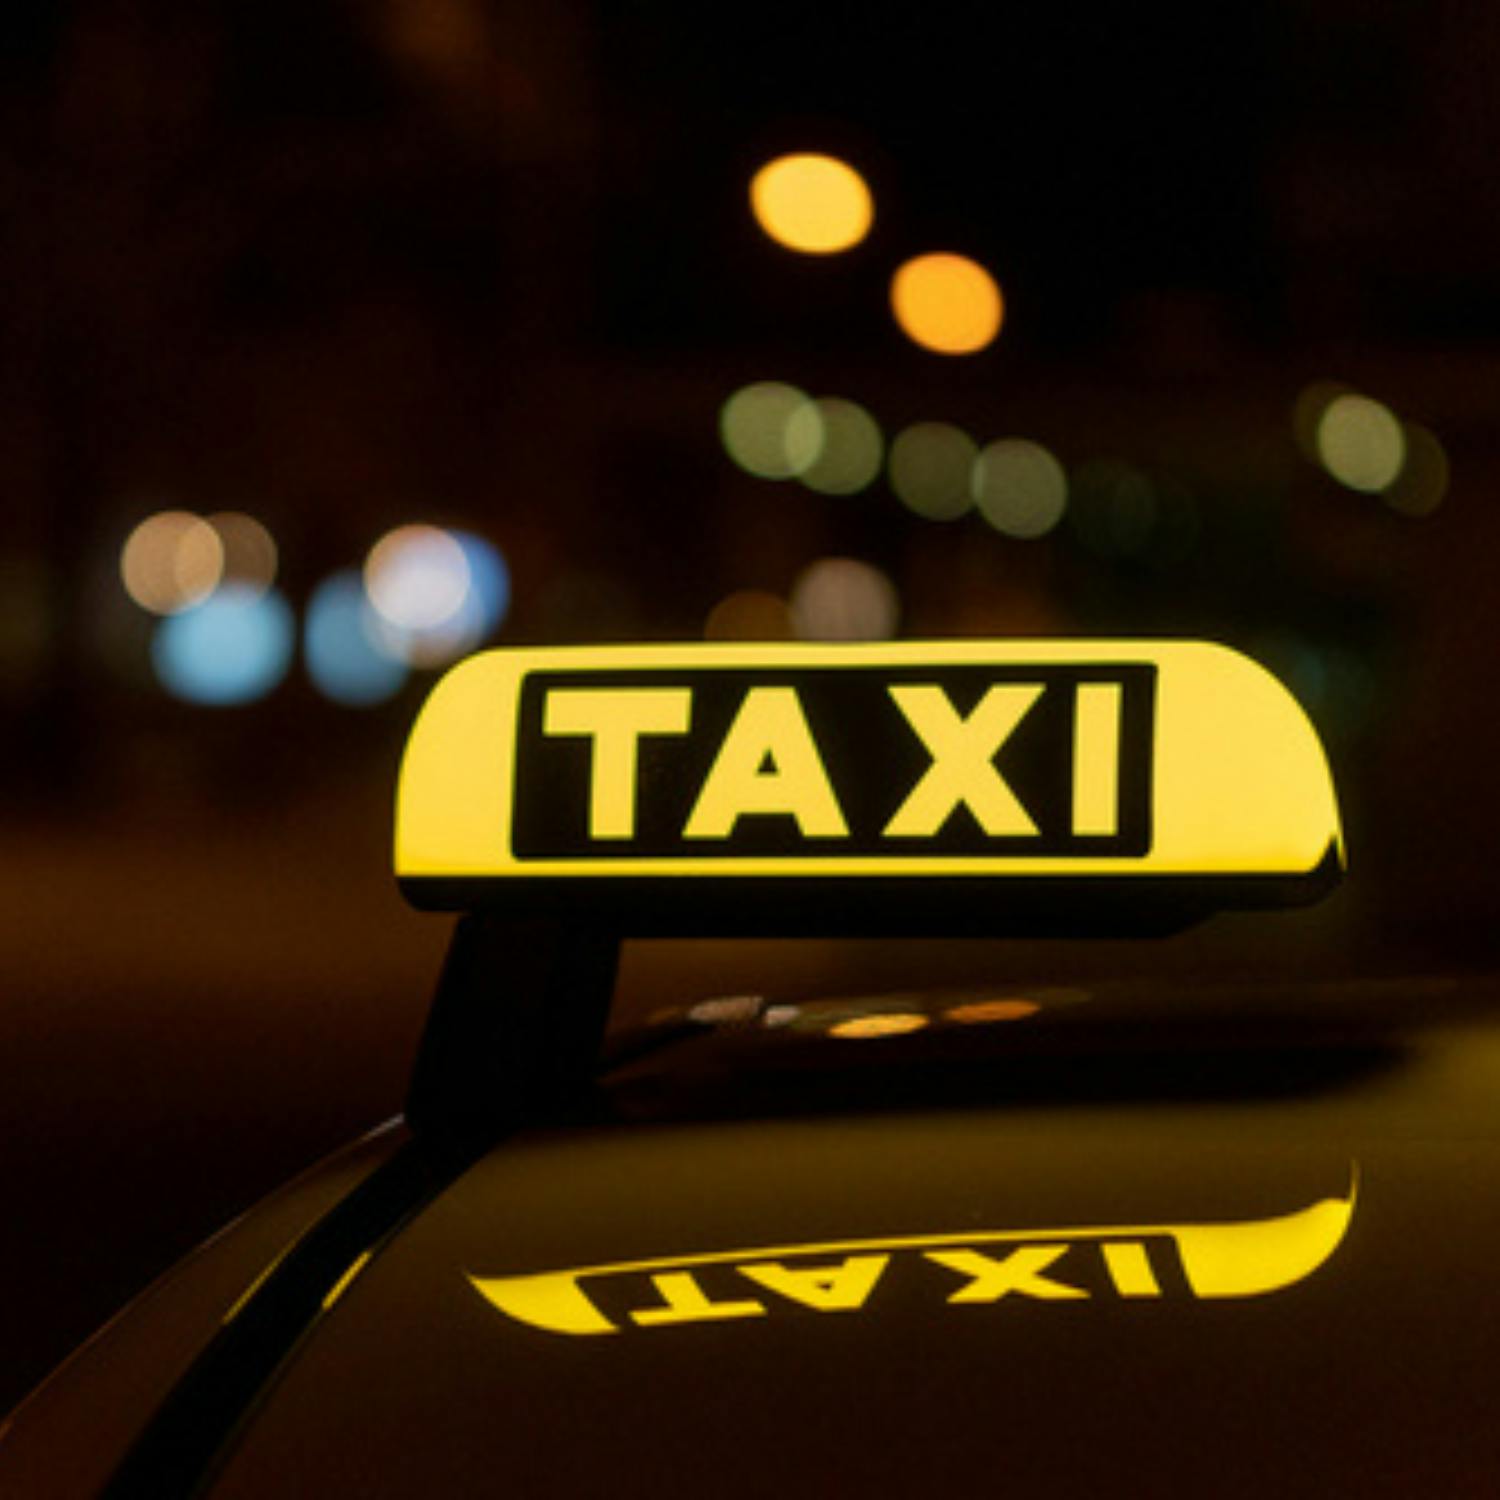 Issues facing the taxi industry